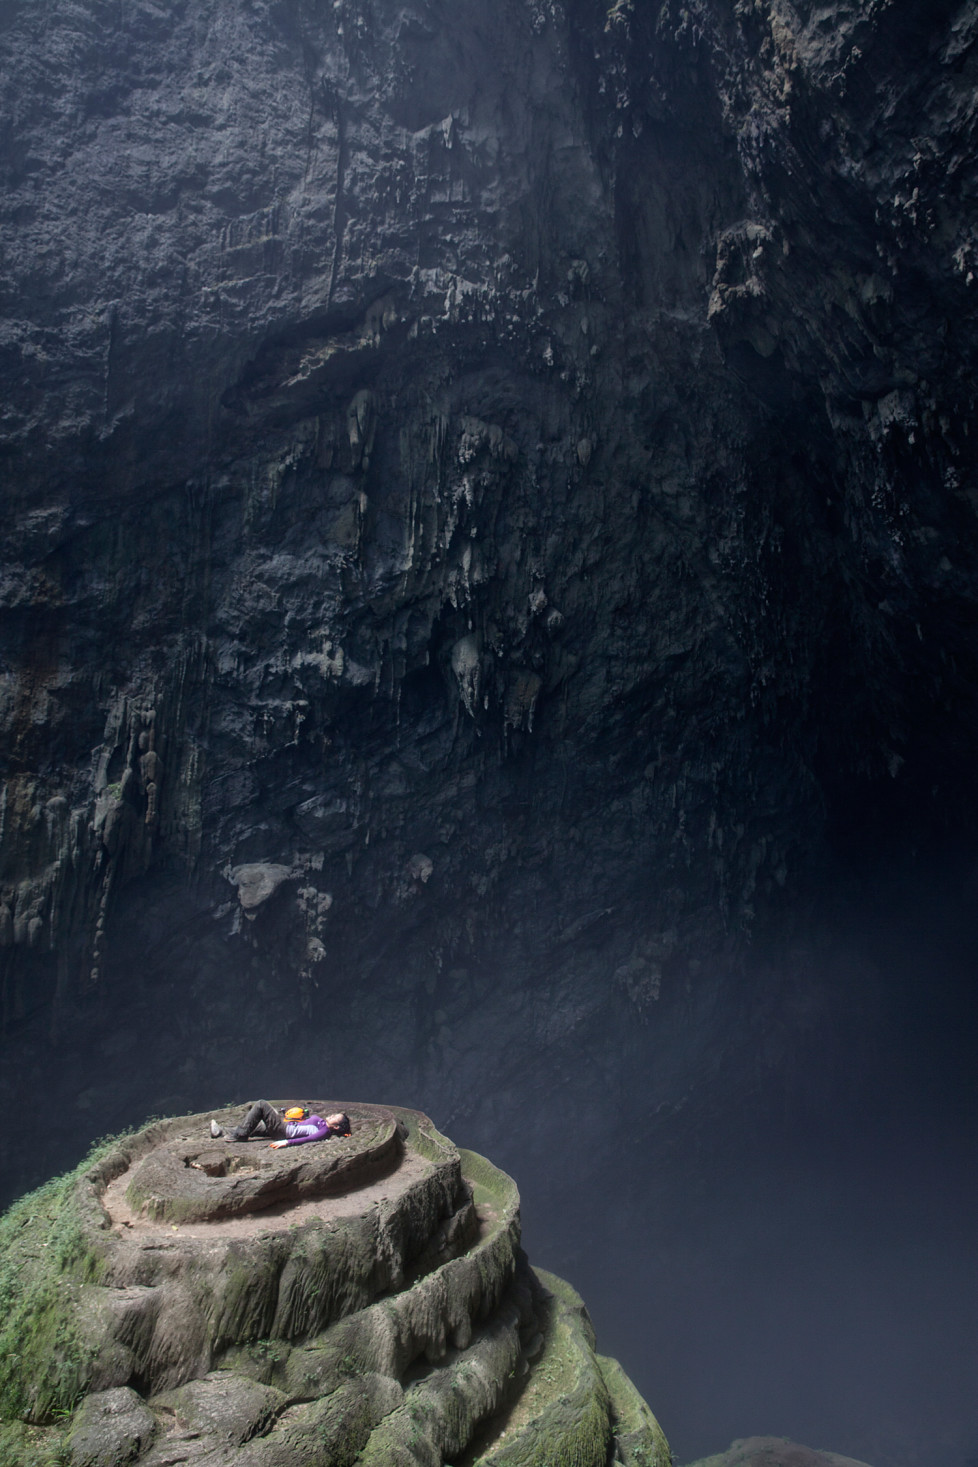 First Donlie in Son Doong Cave. Foto: Tanja Demarmels